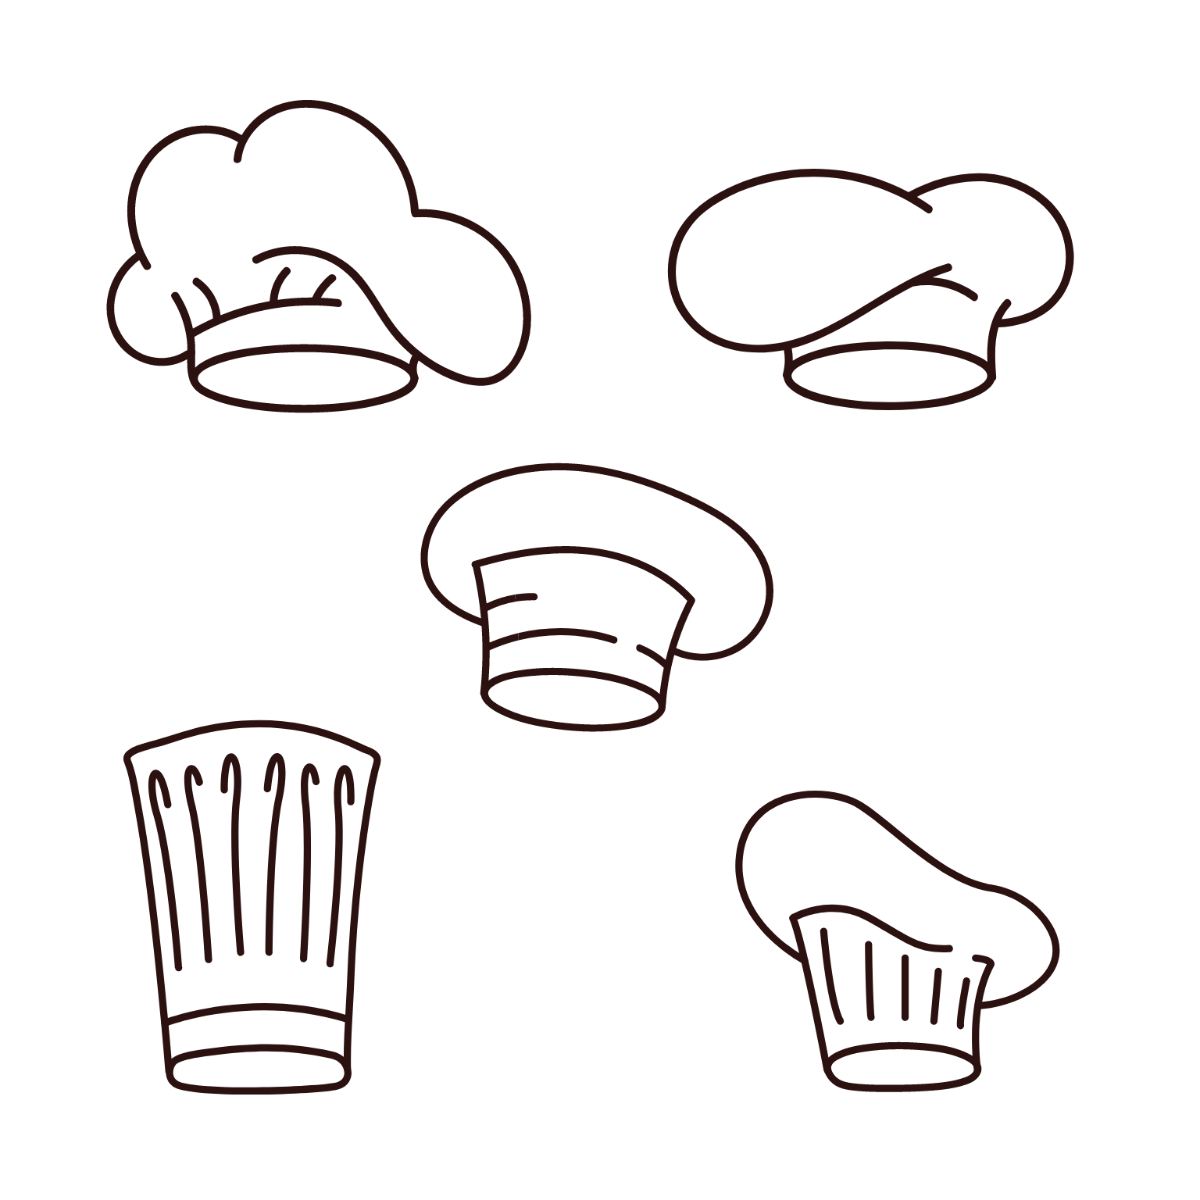 Free Chef Hat Doodle Vector Template